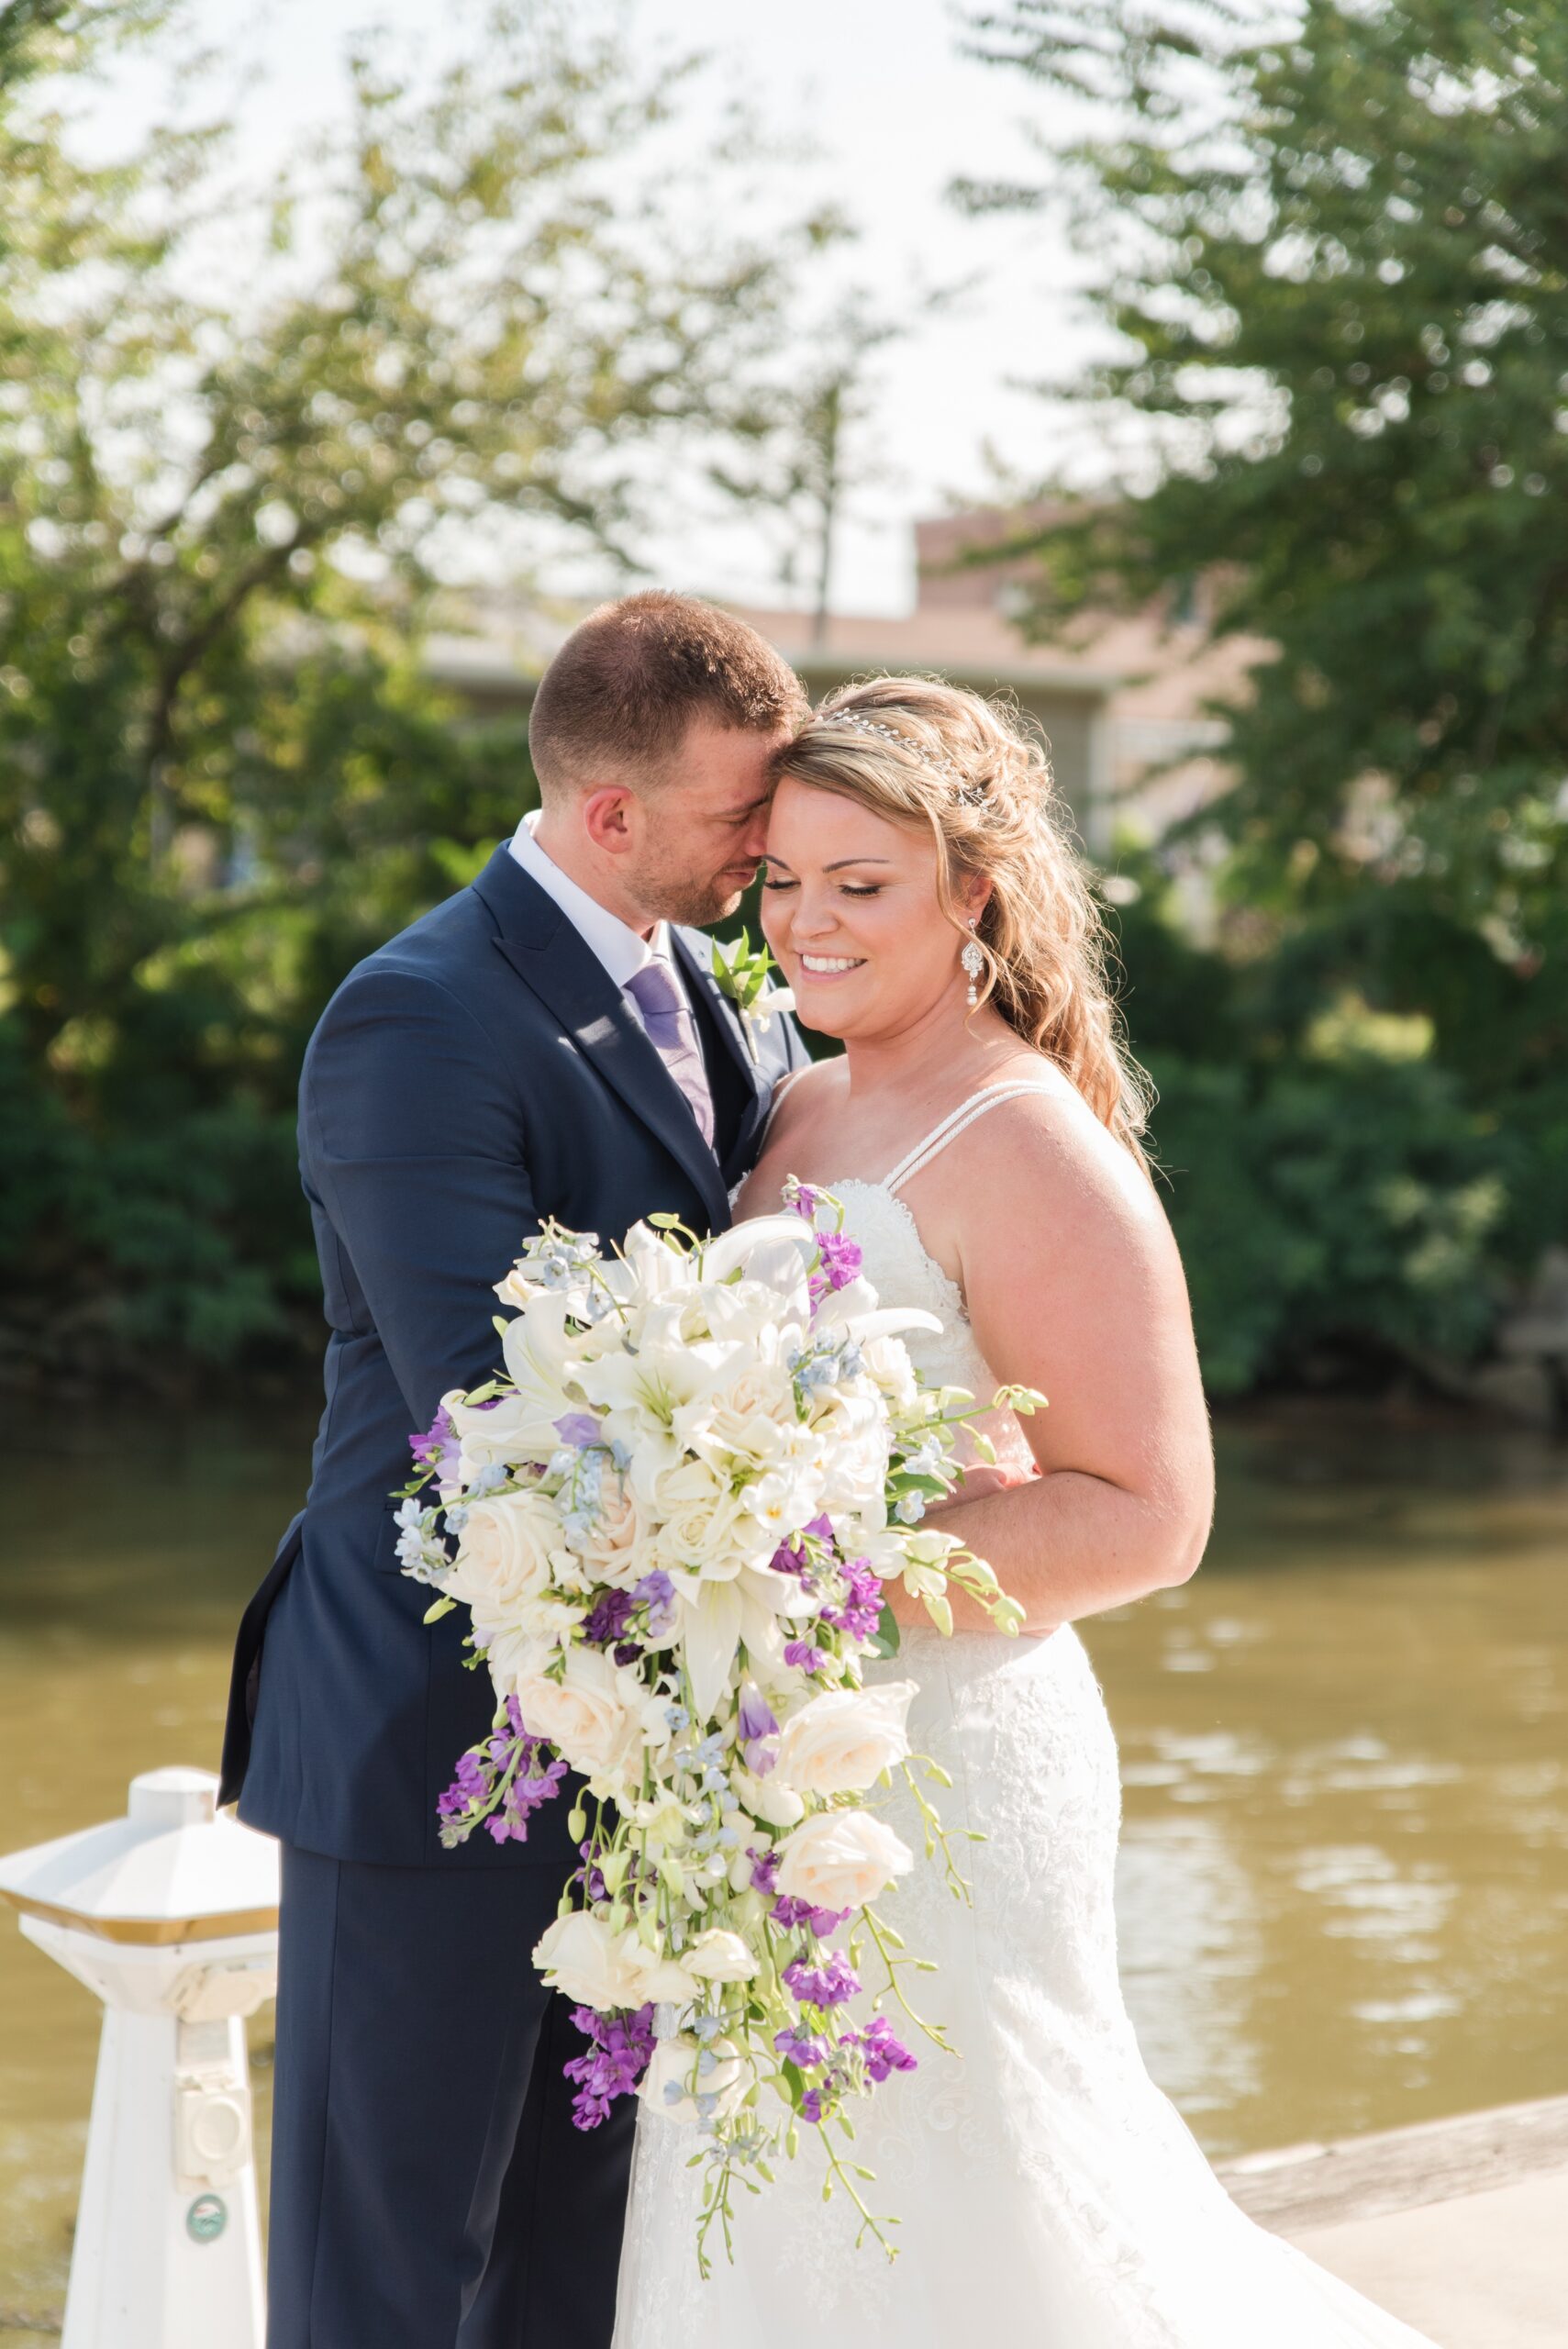 A groom nuzzles his bride while they stand on a dock over the water